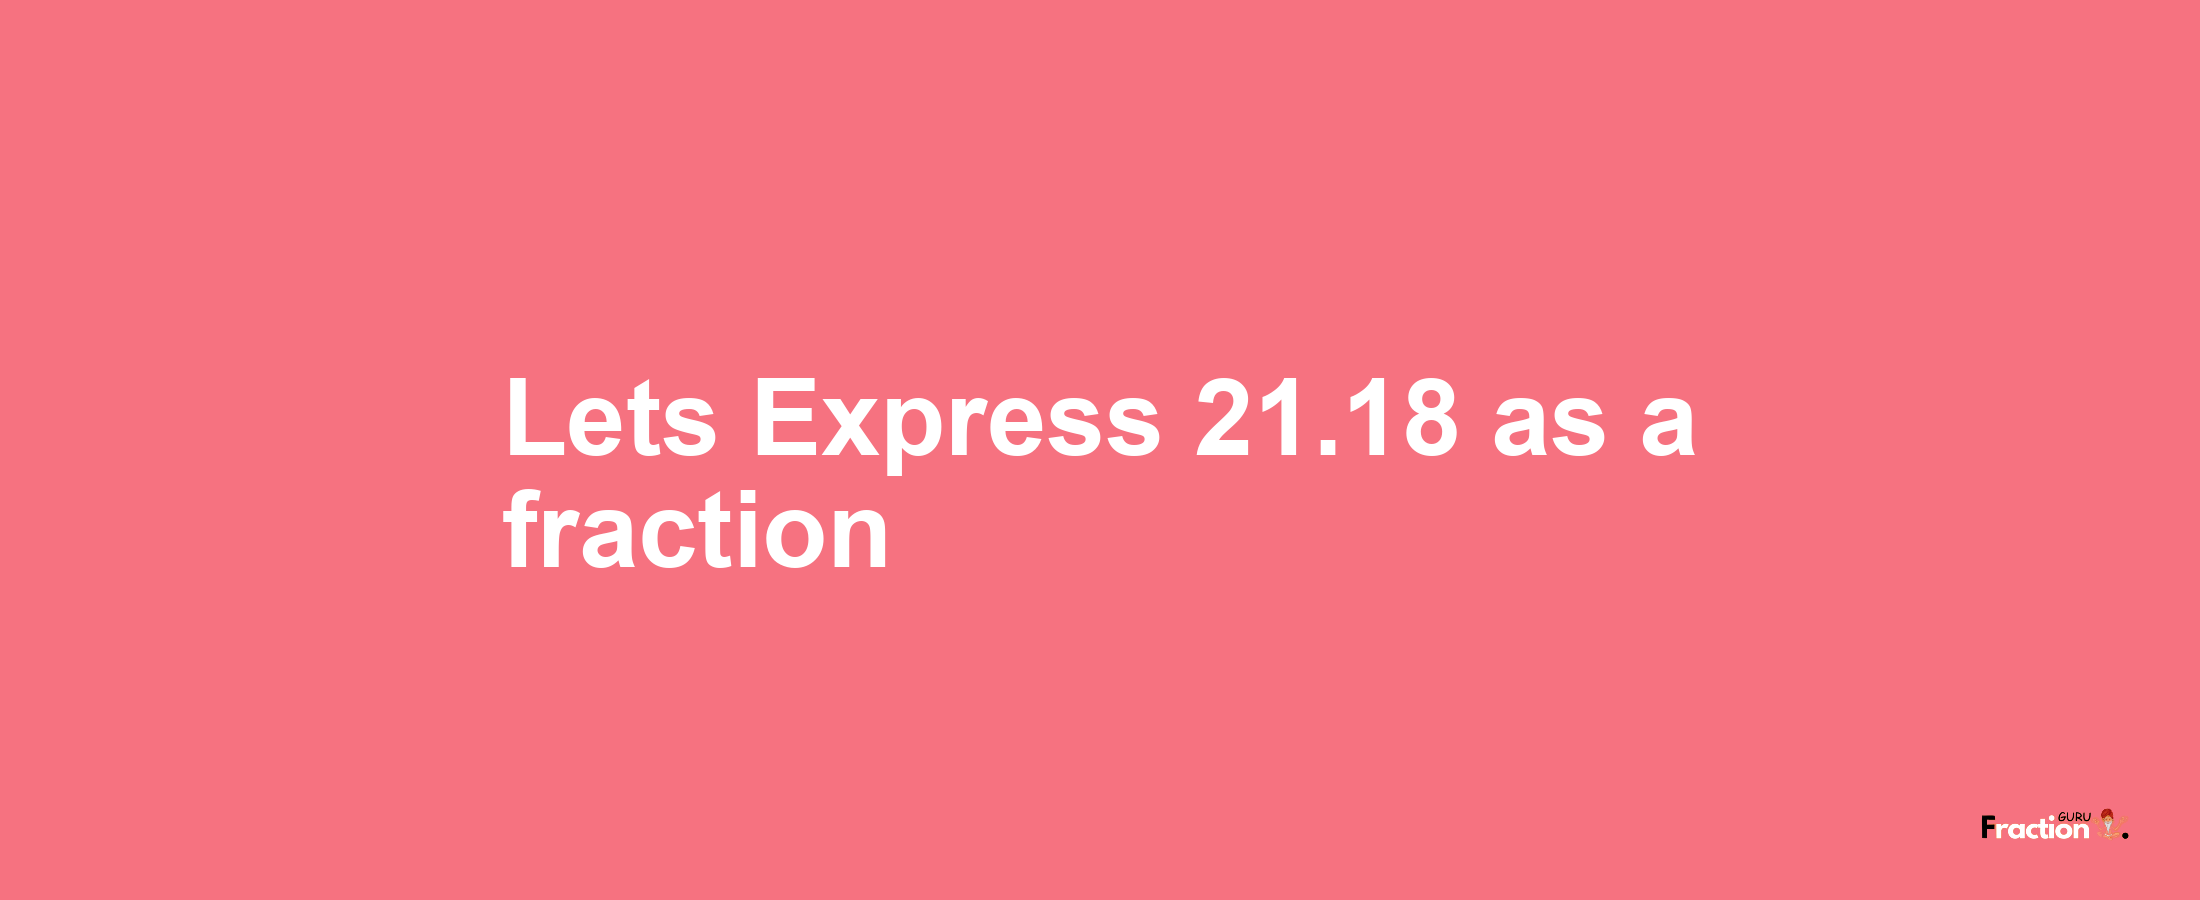 Lets Express 21.18 as afraction